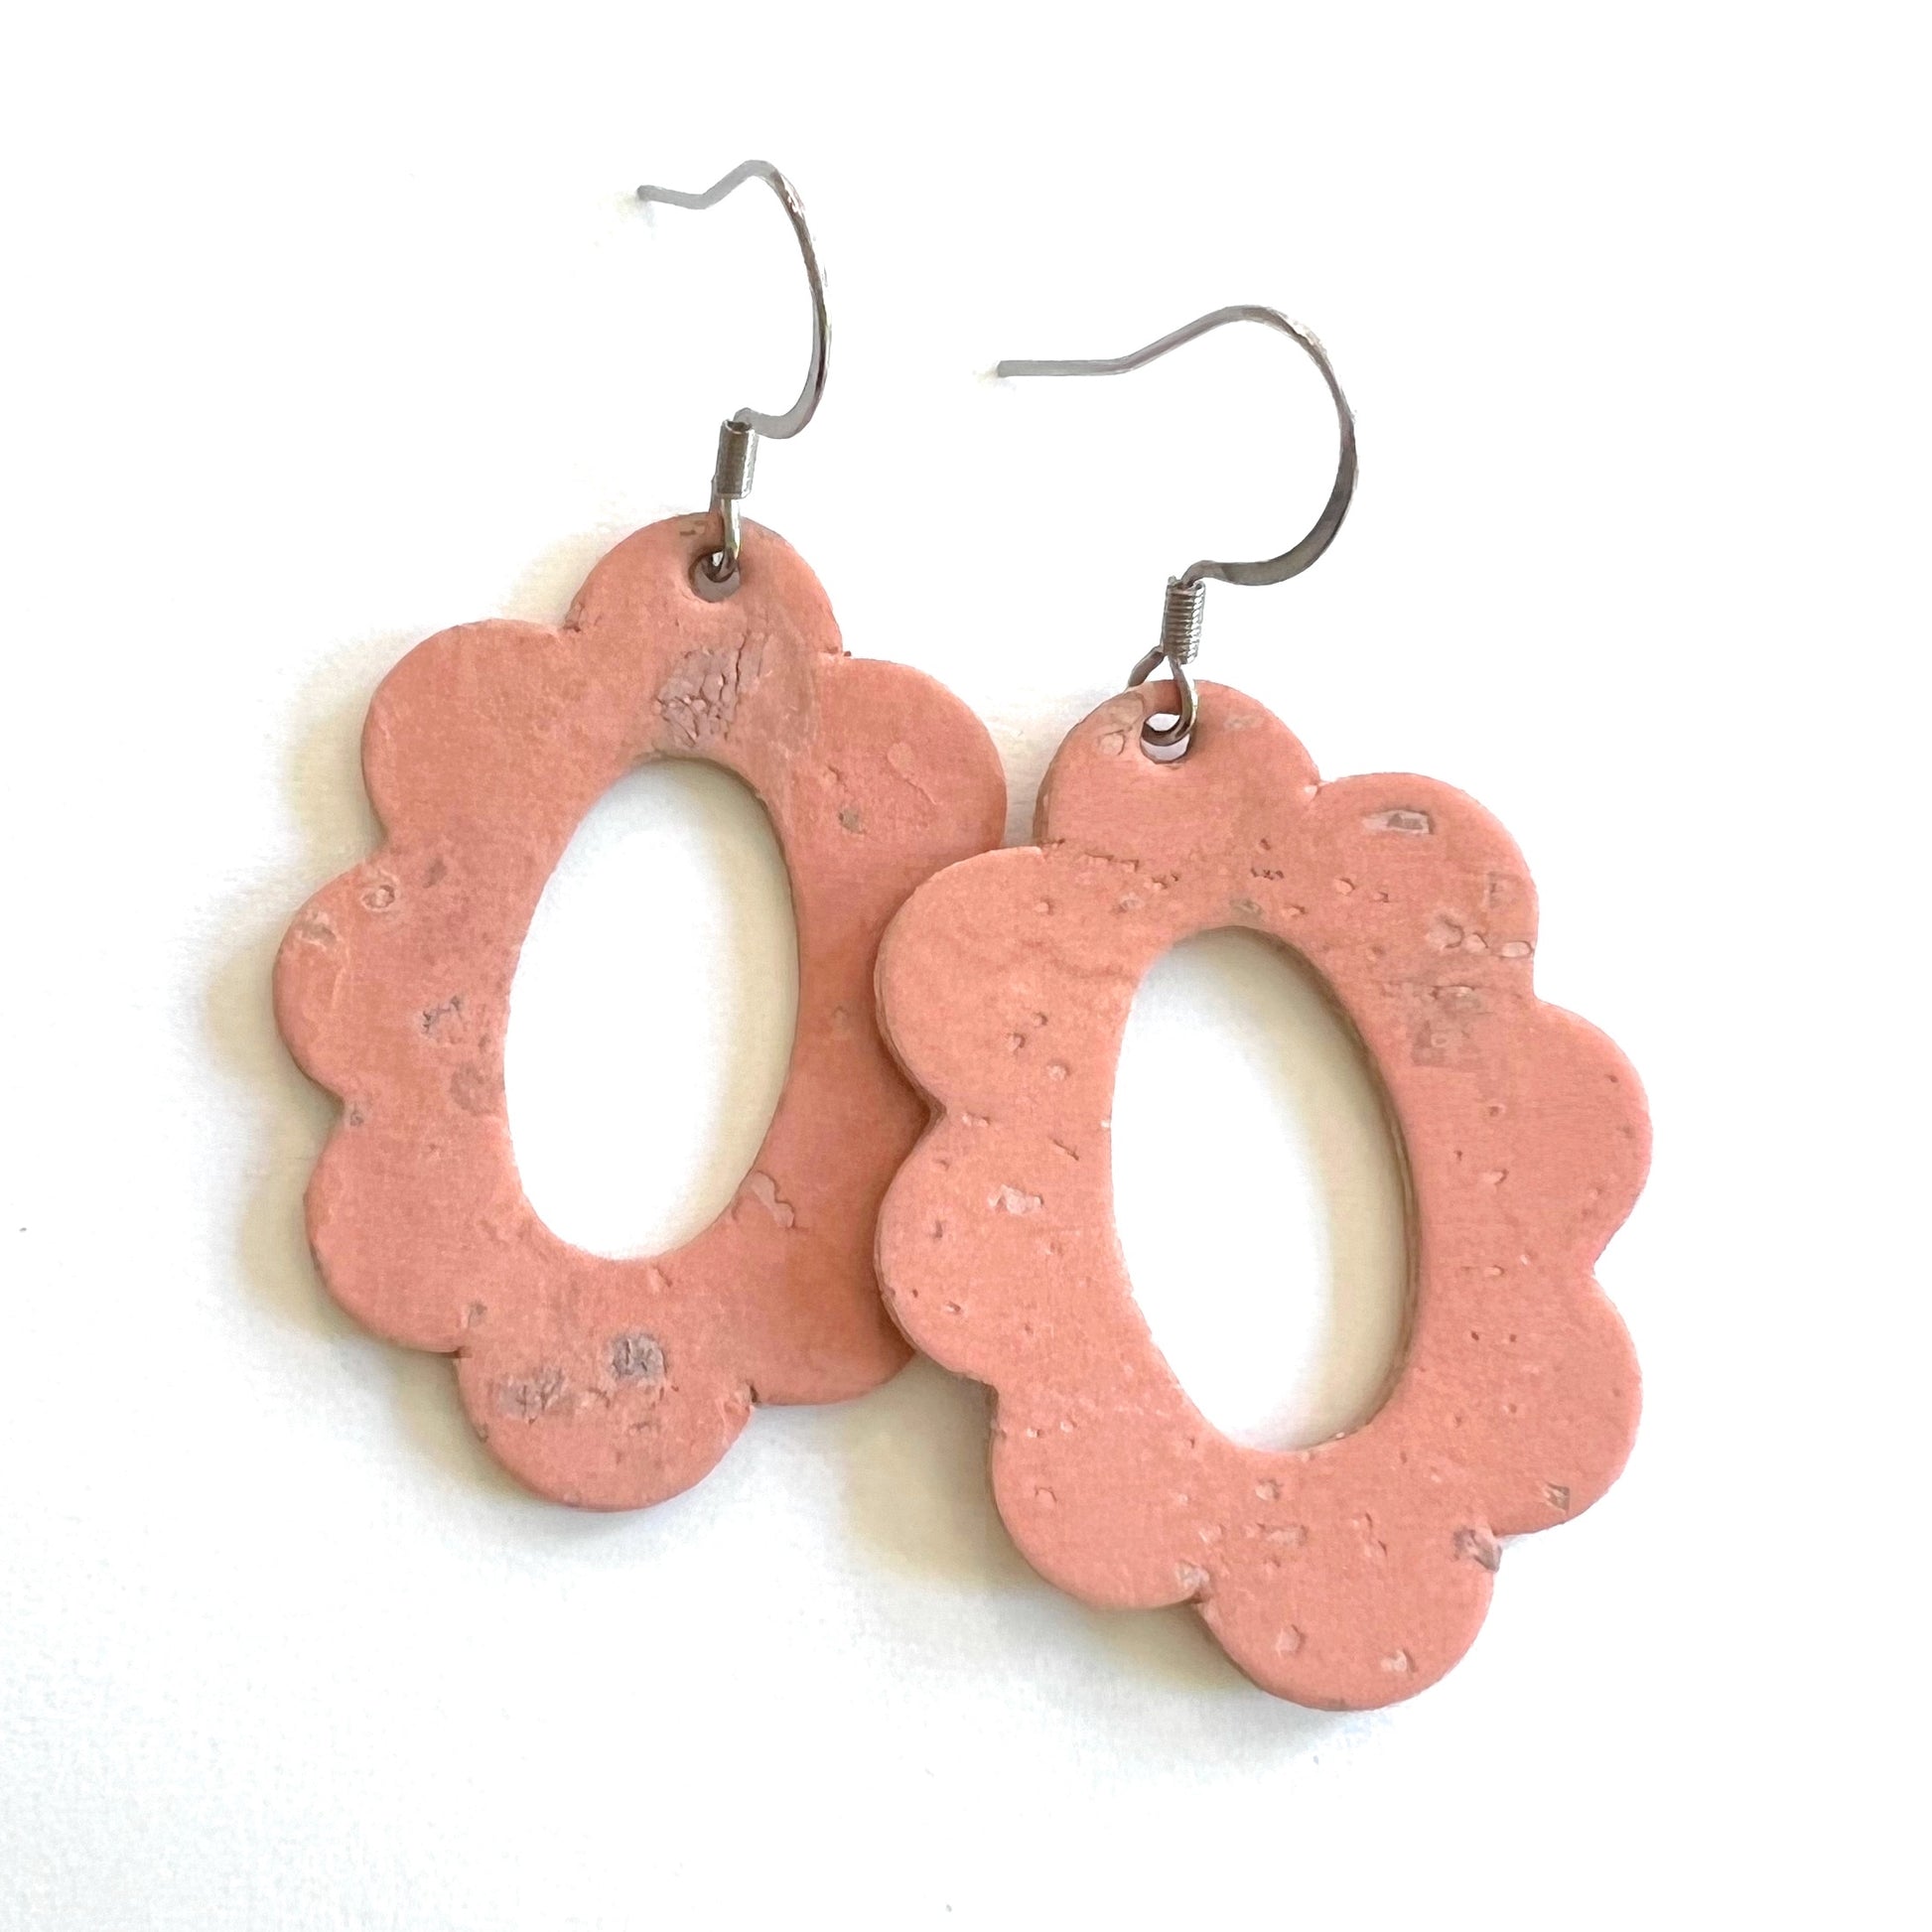 Coral Cork with Oval Flower shape lightweight statement earrings